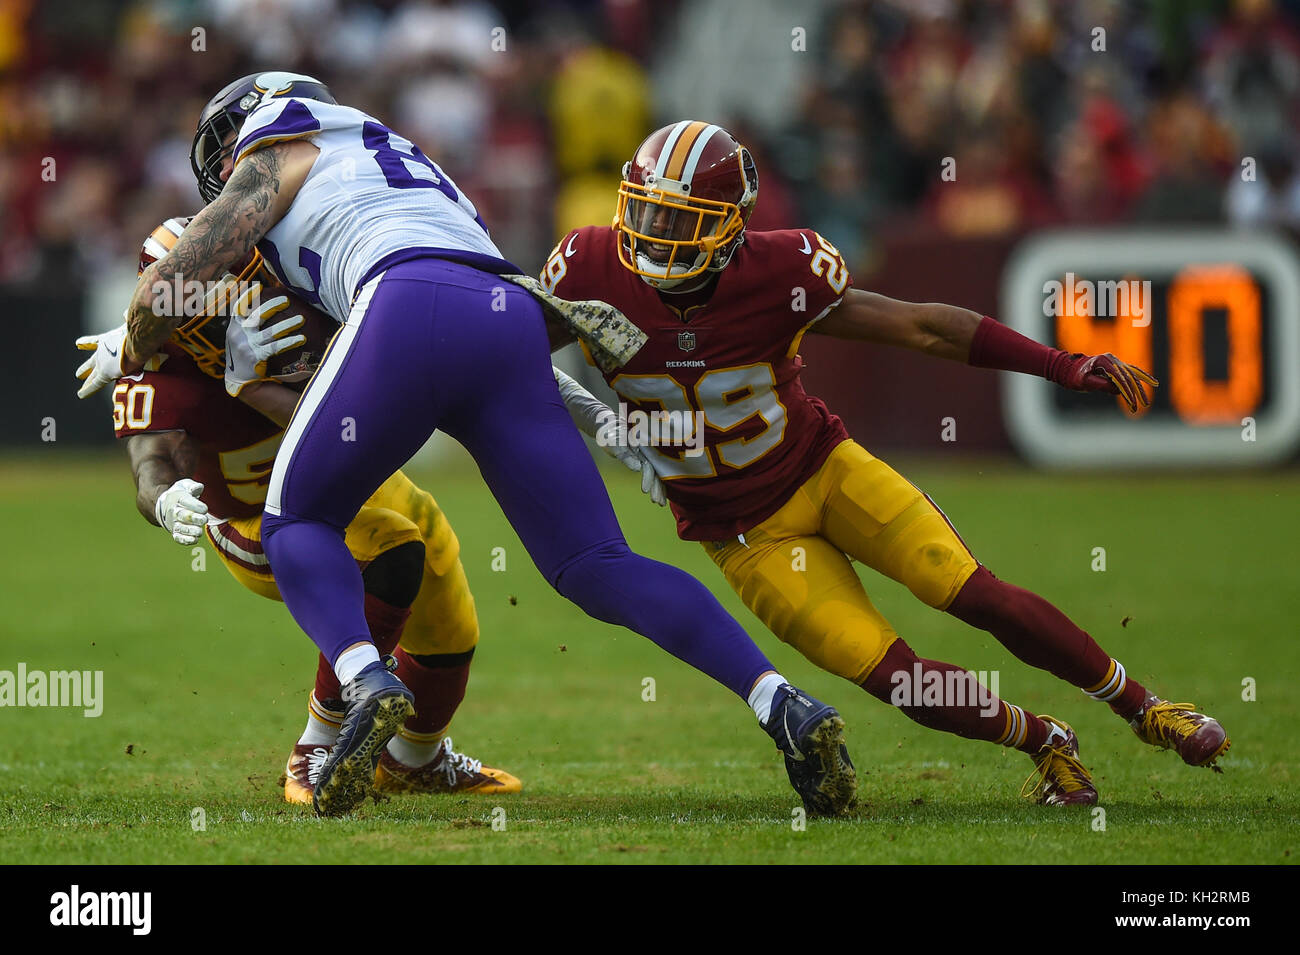 Landover, MD, USA. 12th Nov, 2017. Washington Redskins linebacker Martrell Spaight (50) and cornerback Kendall Fuller (29) tackle Minnesota Vikings tight end Kyle Rudolph (82) during the matchup between the Minnesota Vikings and the Washington Redskins at FedEx Field in Landover, MD. Credit: csm/Alamy Live News Stock Photo